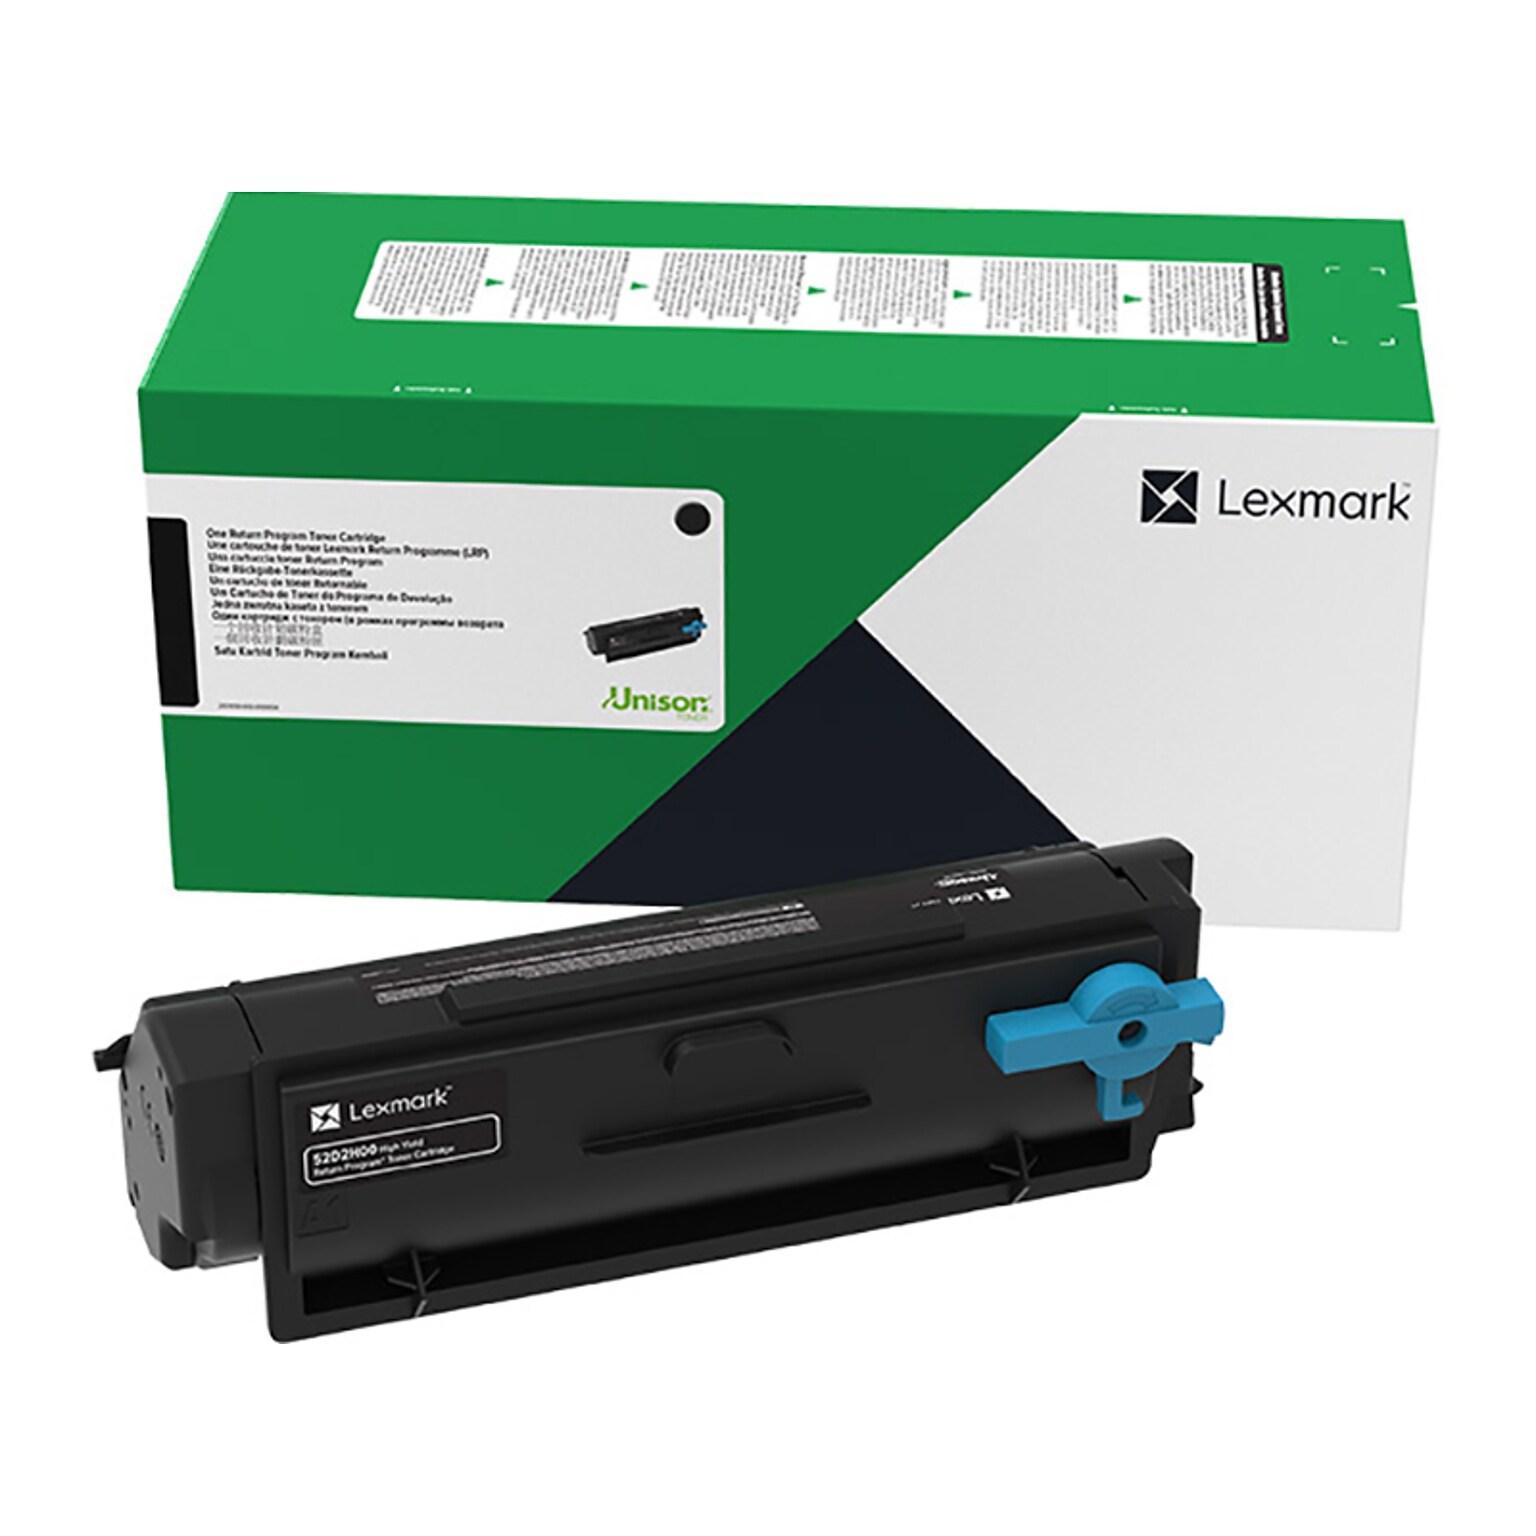 Lexmark B341H00 Black High Yield Toner Cartridge, Prints Up to 3,000 Pages